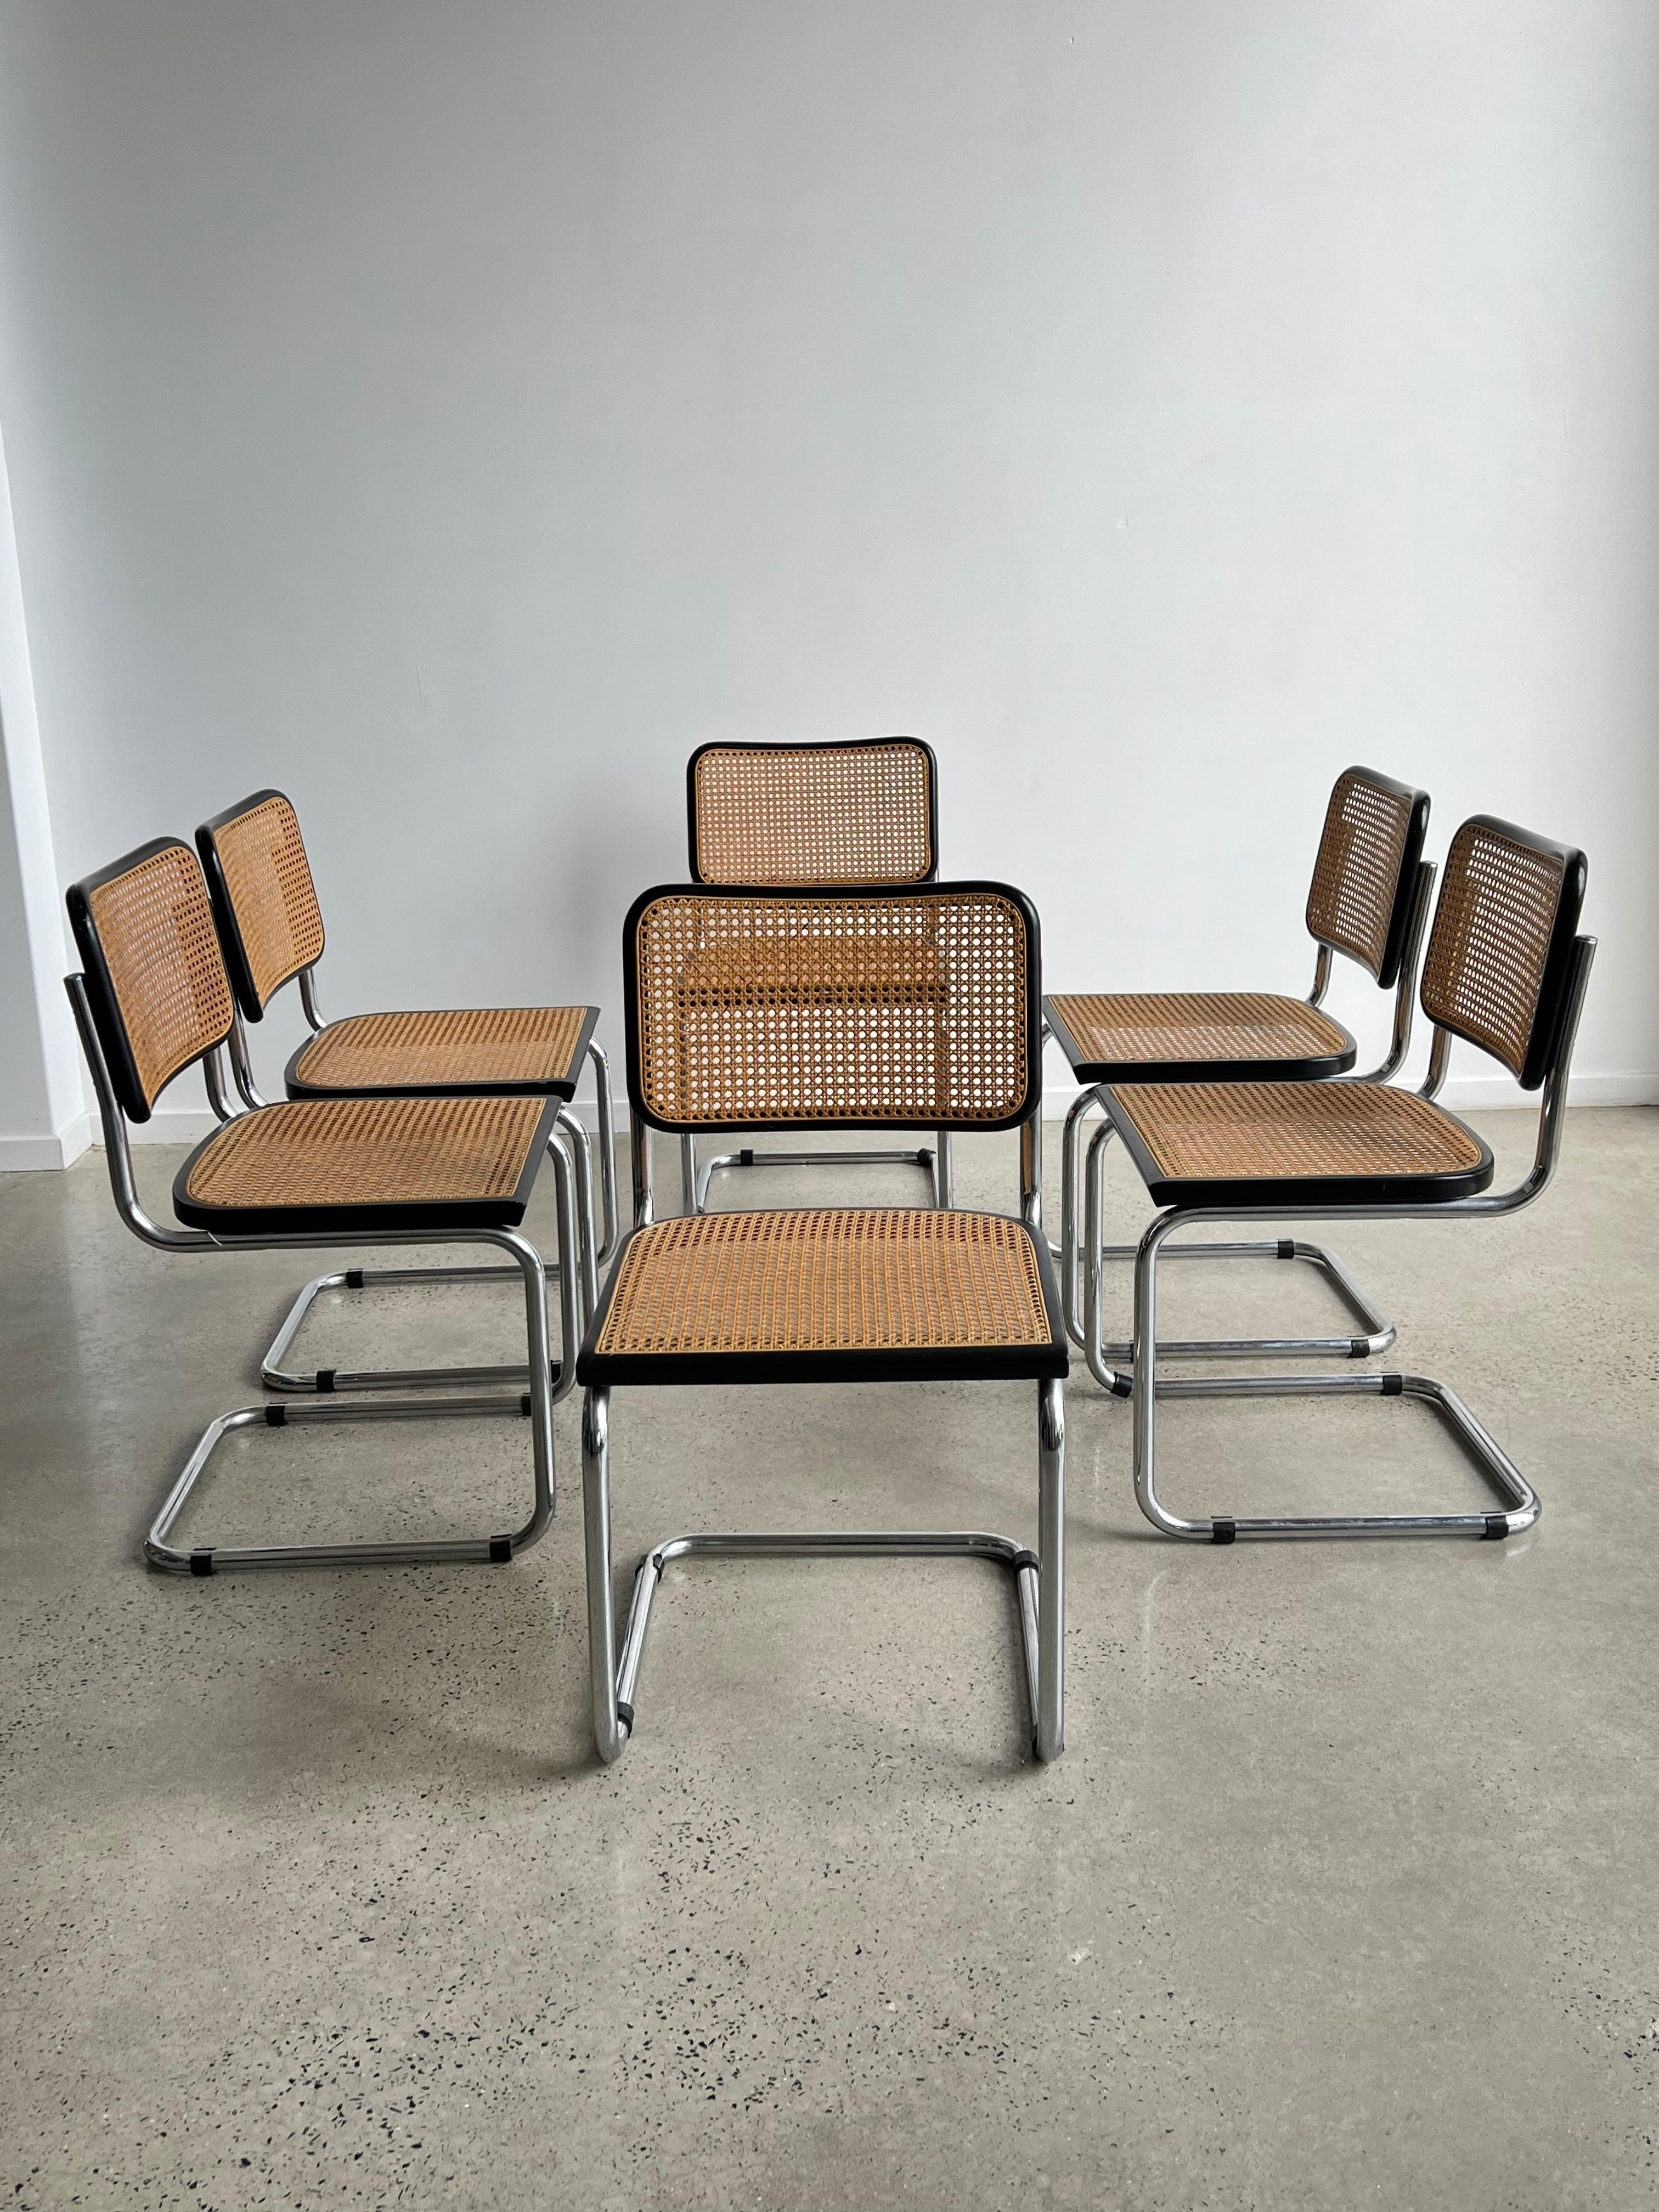 Set of two Cesca chairs, model B32, made in Italy in the 1970s. Black lacquered beech wood frames and Viennese natural grid. The grills of the two seats and backs have been put new. Very good general condition.